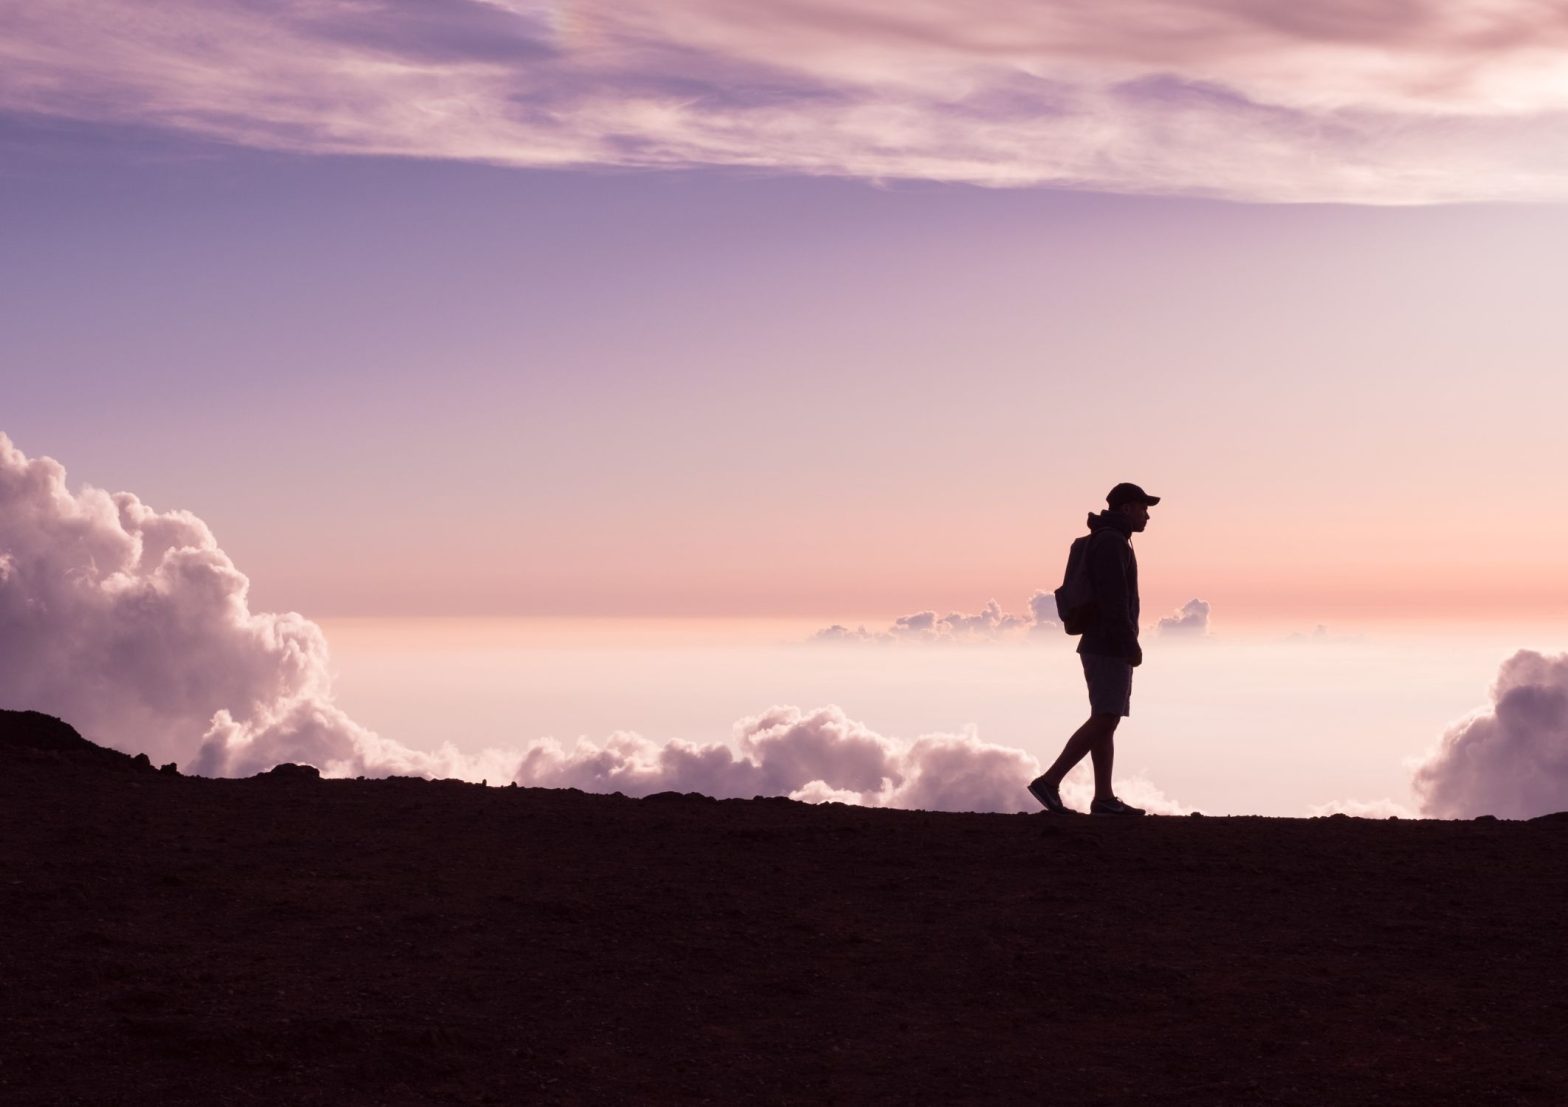 Image shows person walking in a vast outdoor space during sunset looking deep in thought and enjoying all the benefits of walking and walking meditation for their mental health and wellbeing